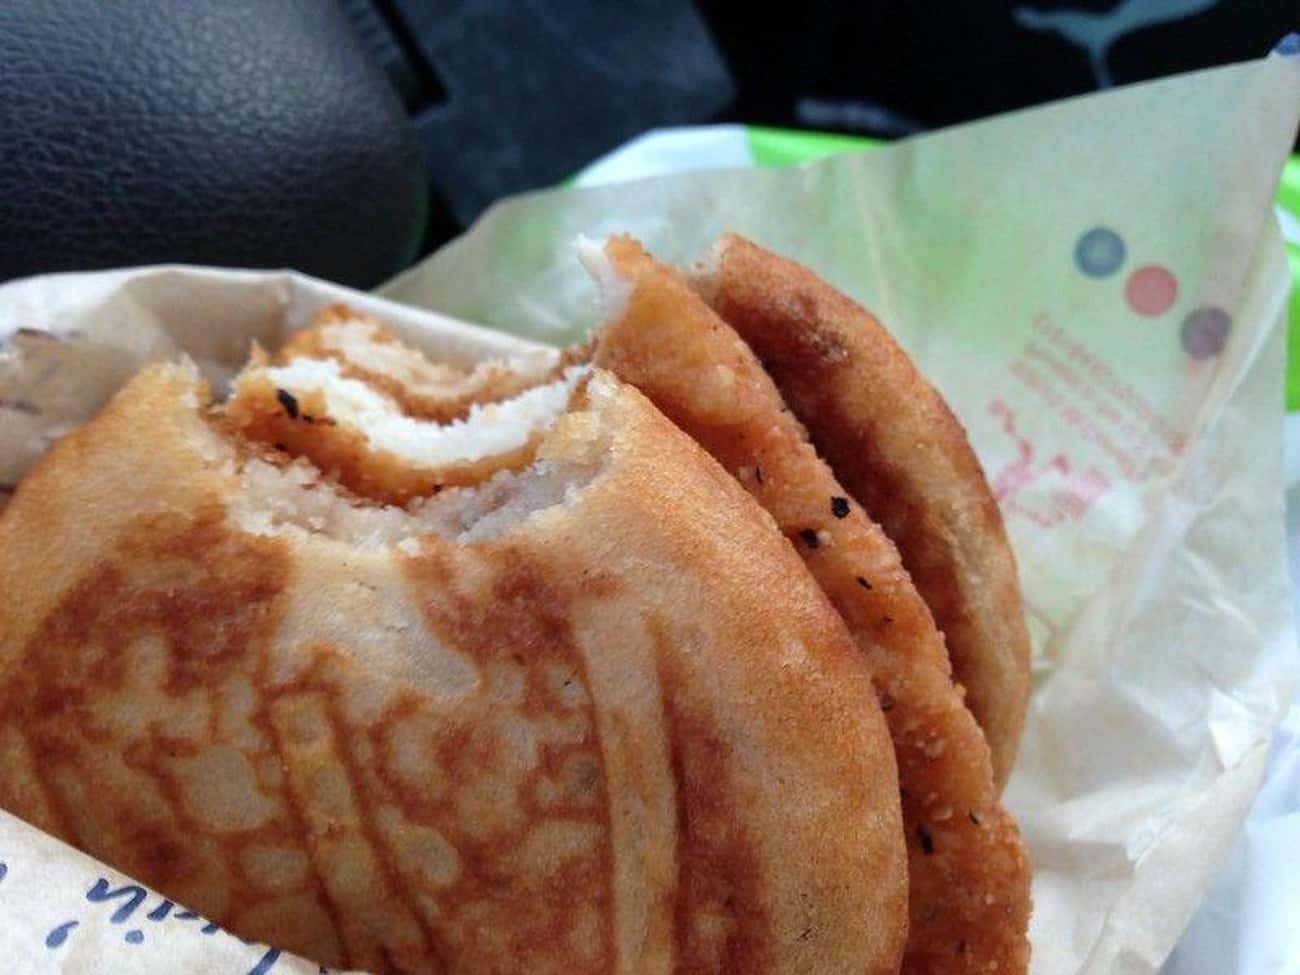 The Chicken McGriddle